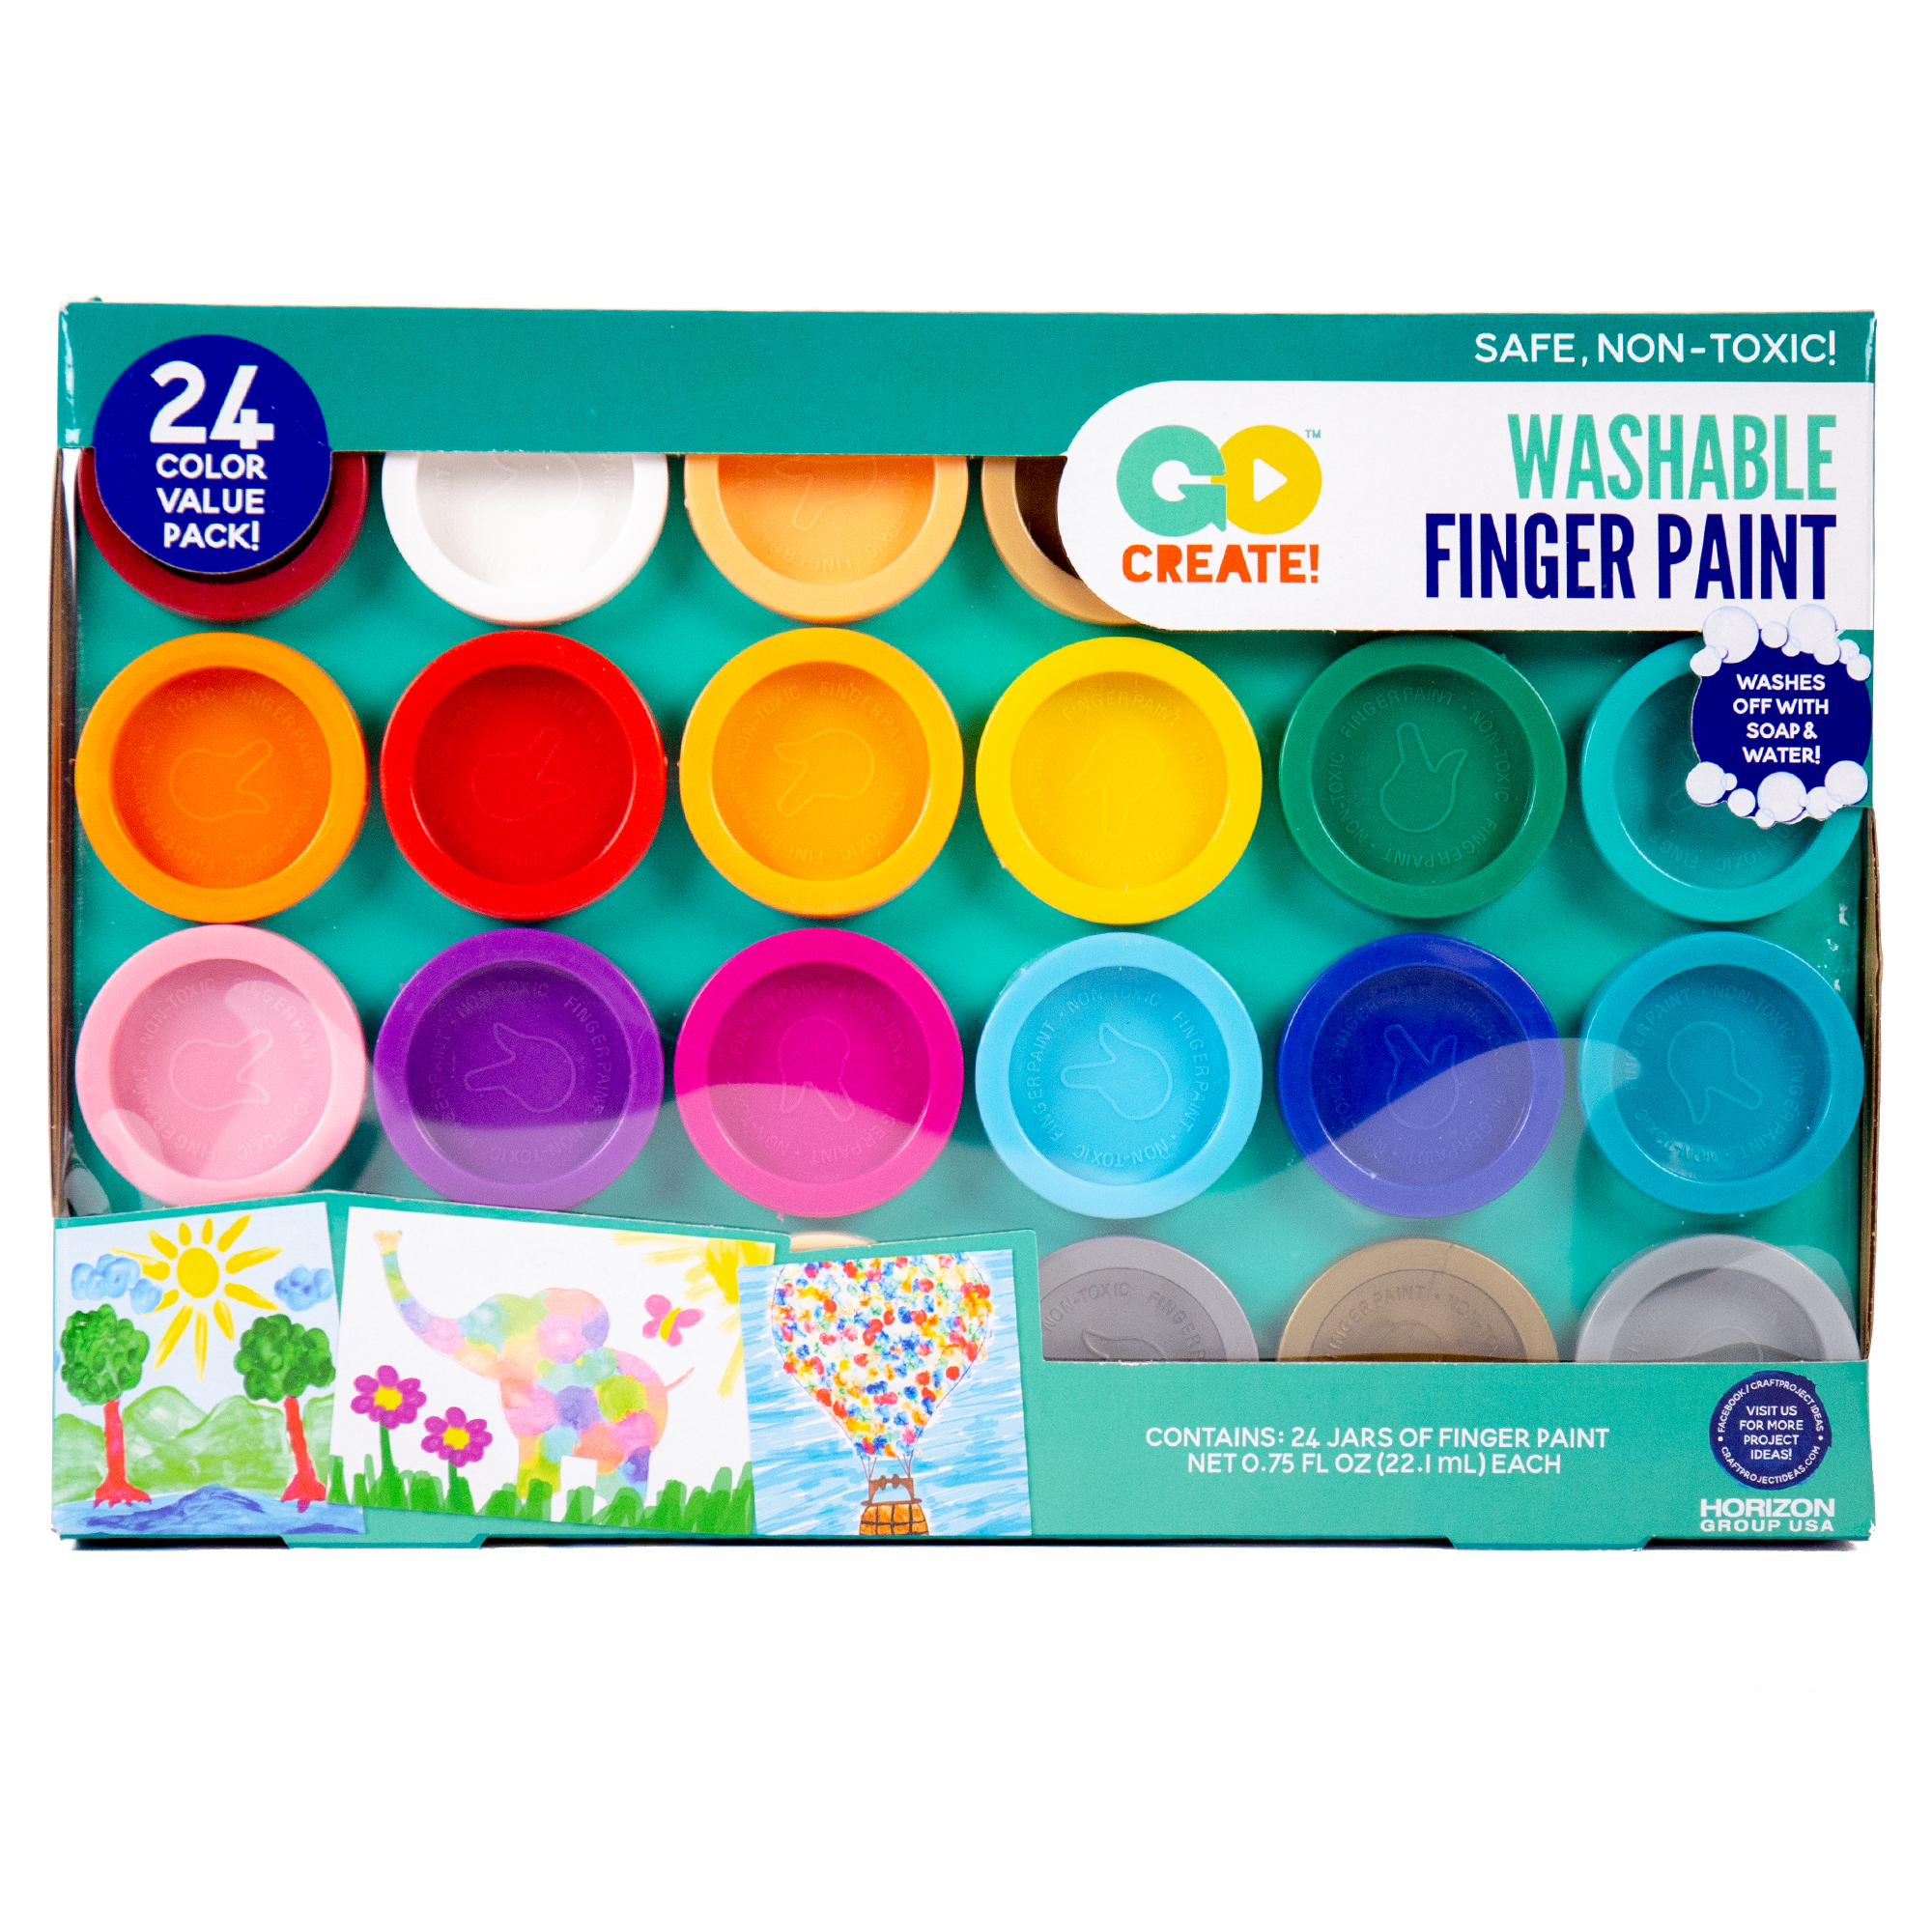 Go Create Washable Finger Paint Non-Toxic, 24 Count - image 1 of 8